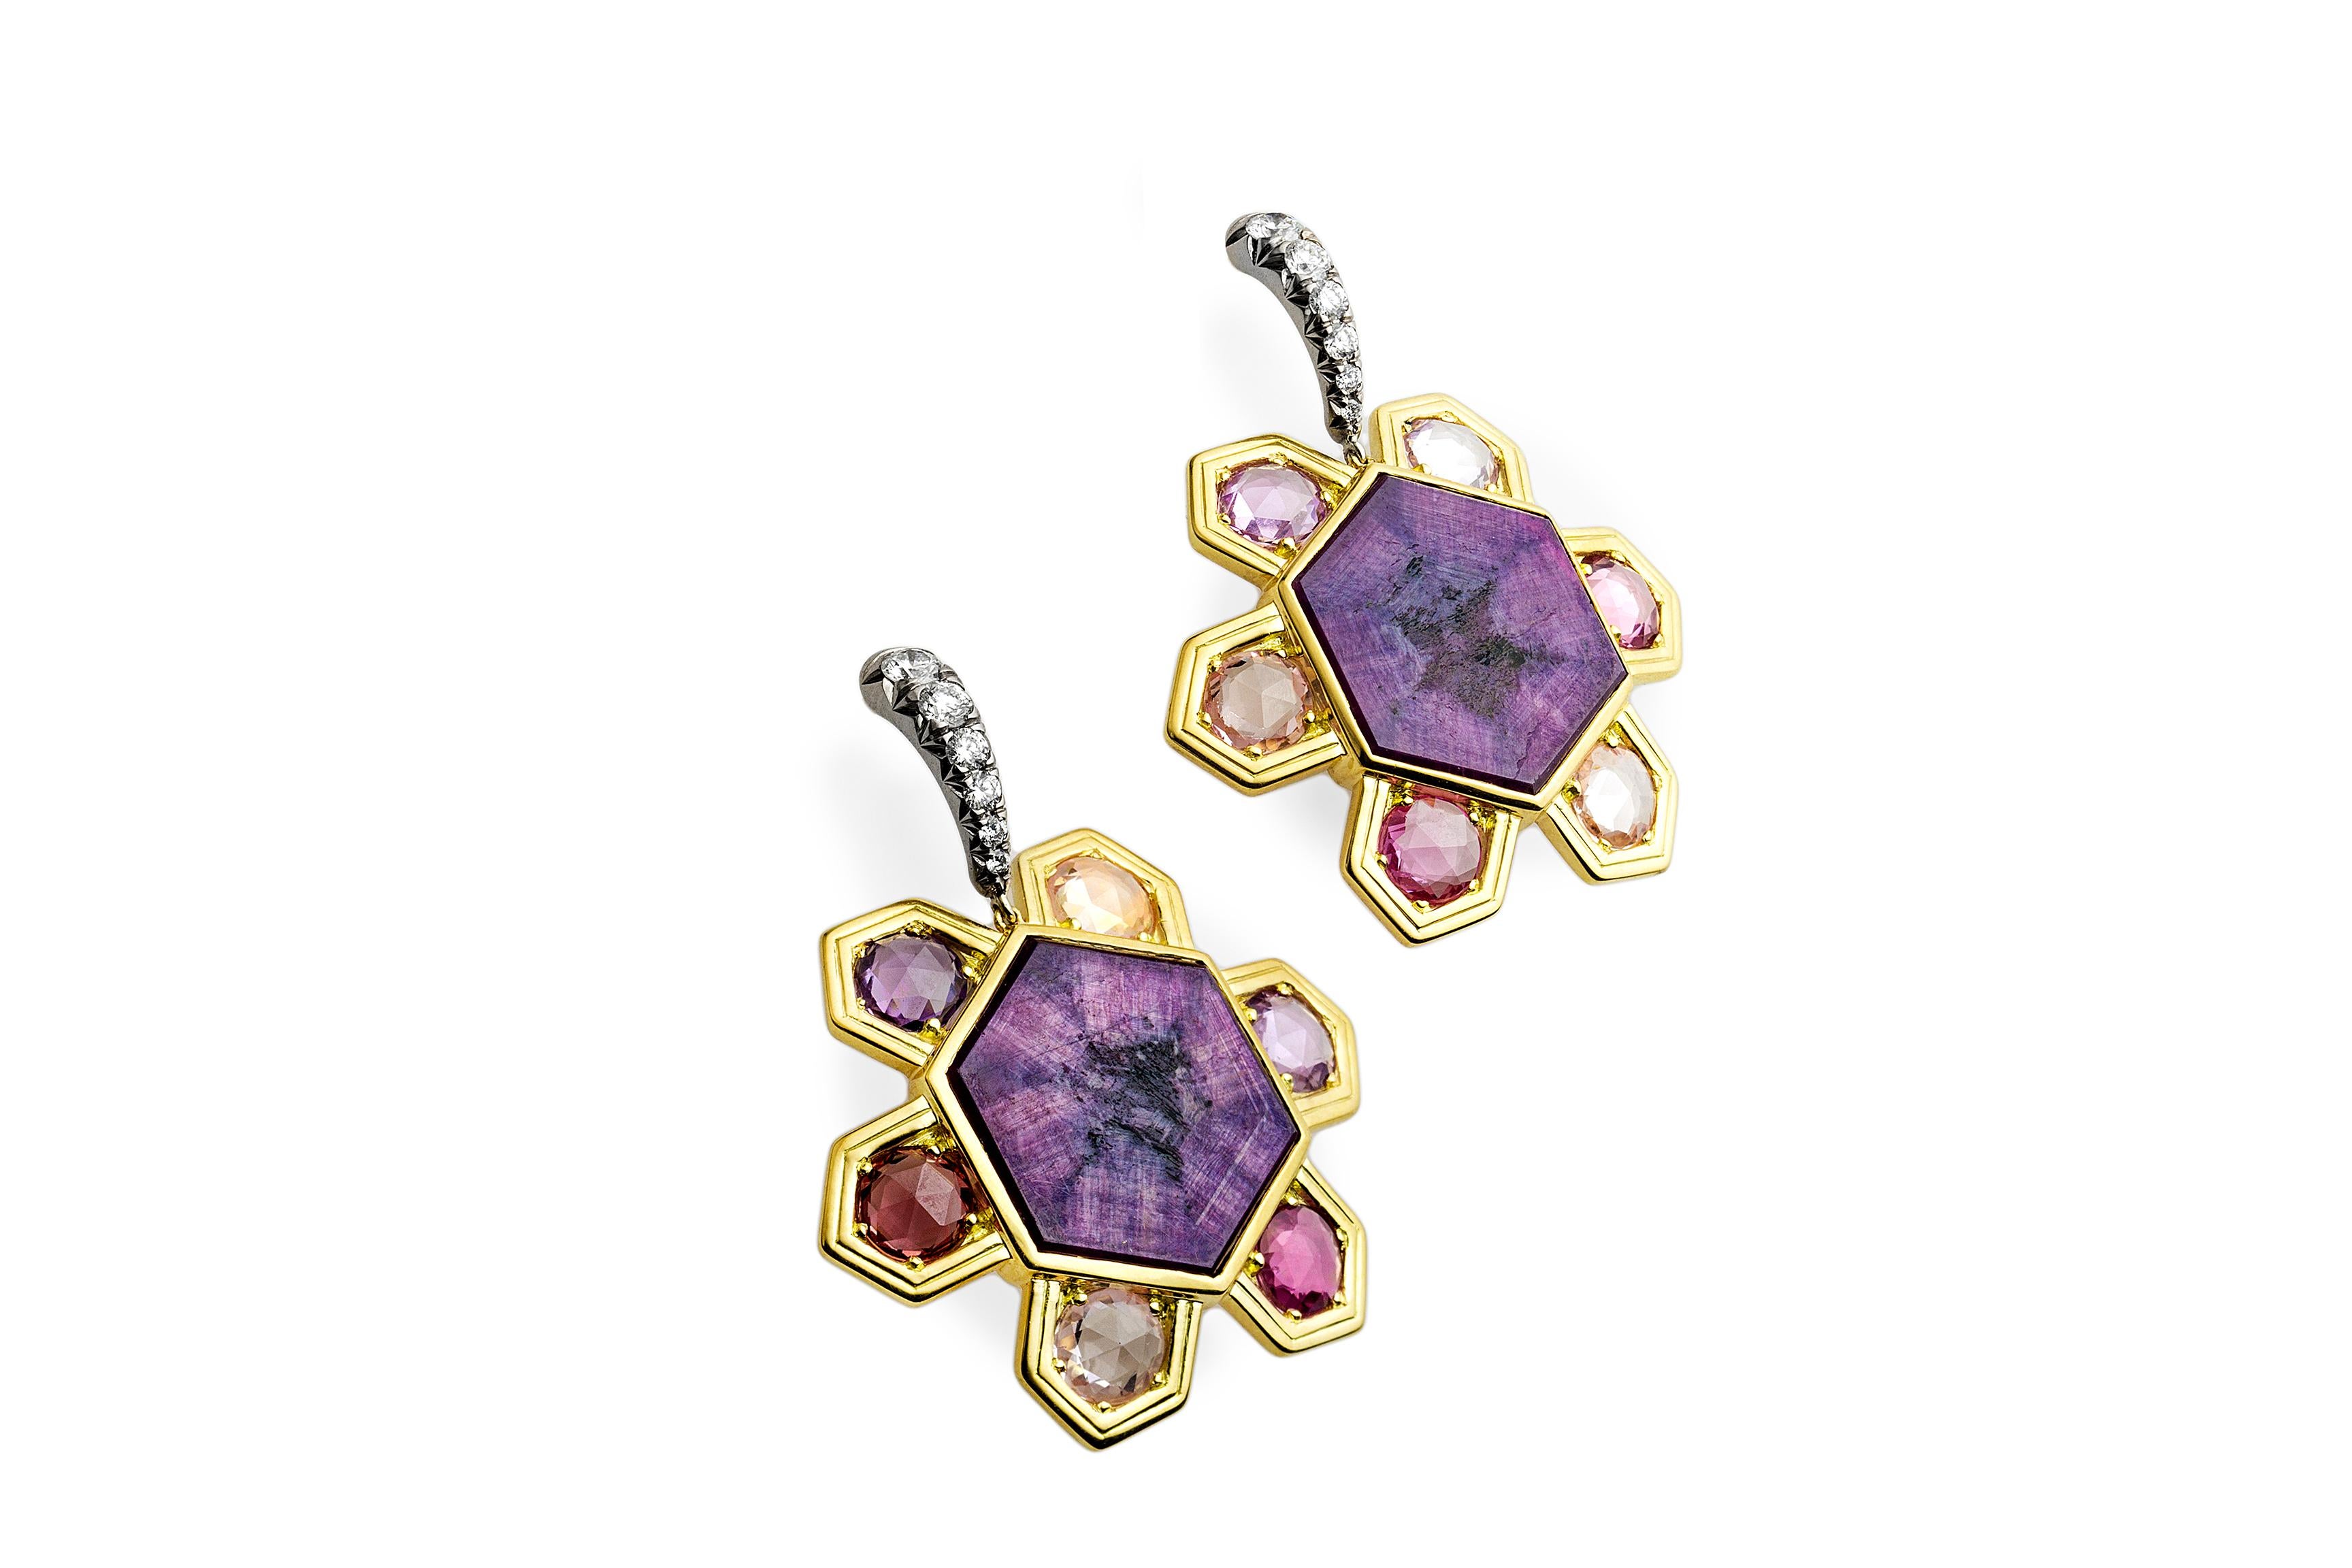 ONE-OF-A-KIND 

The 'Ne Me Quitte Pas' earrings are one-of-a-kind and are inspired by the rare and exquisite pair of Trapaiche rubies and unheated rose-cut multi-colored sapphires used in their creation. The ruby hexagon is surrounded by six